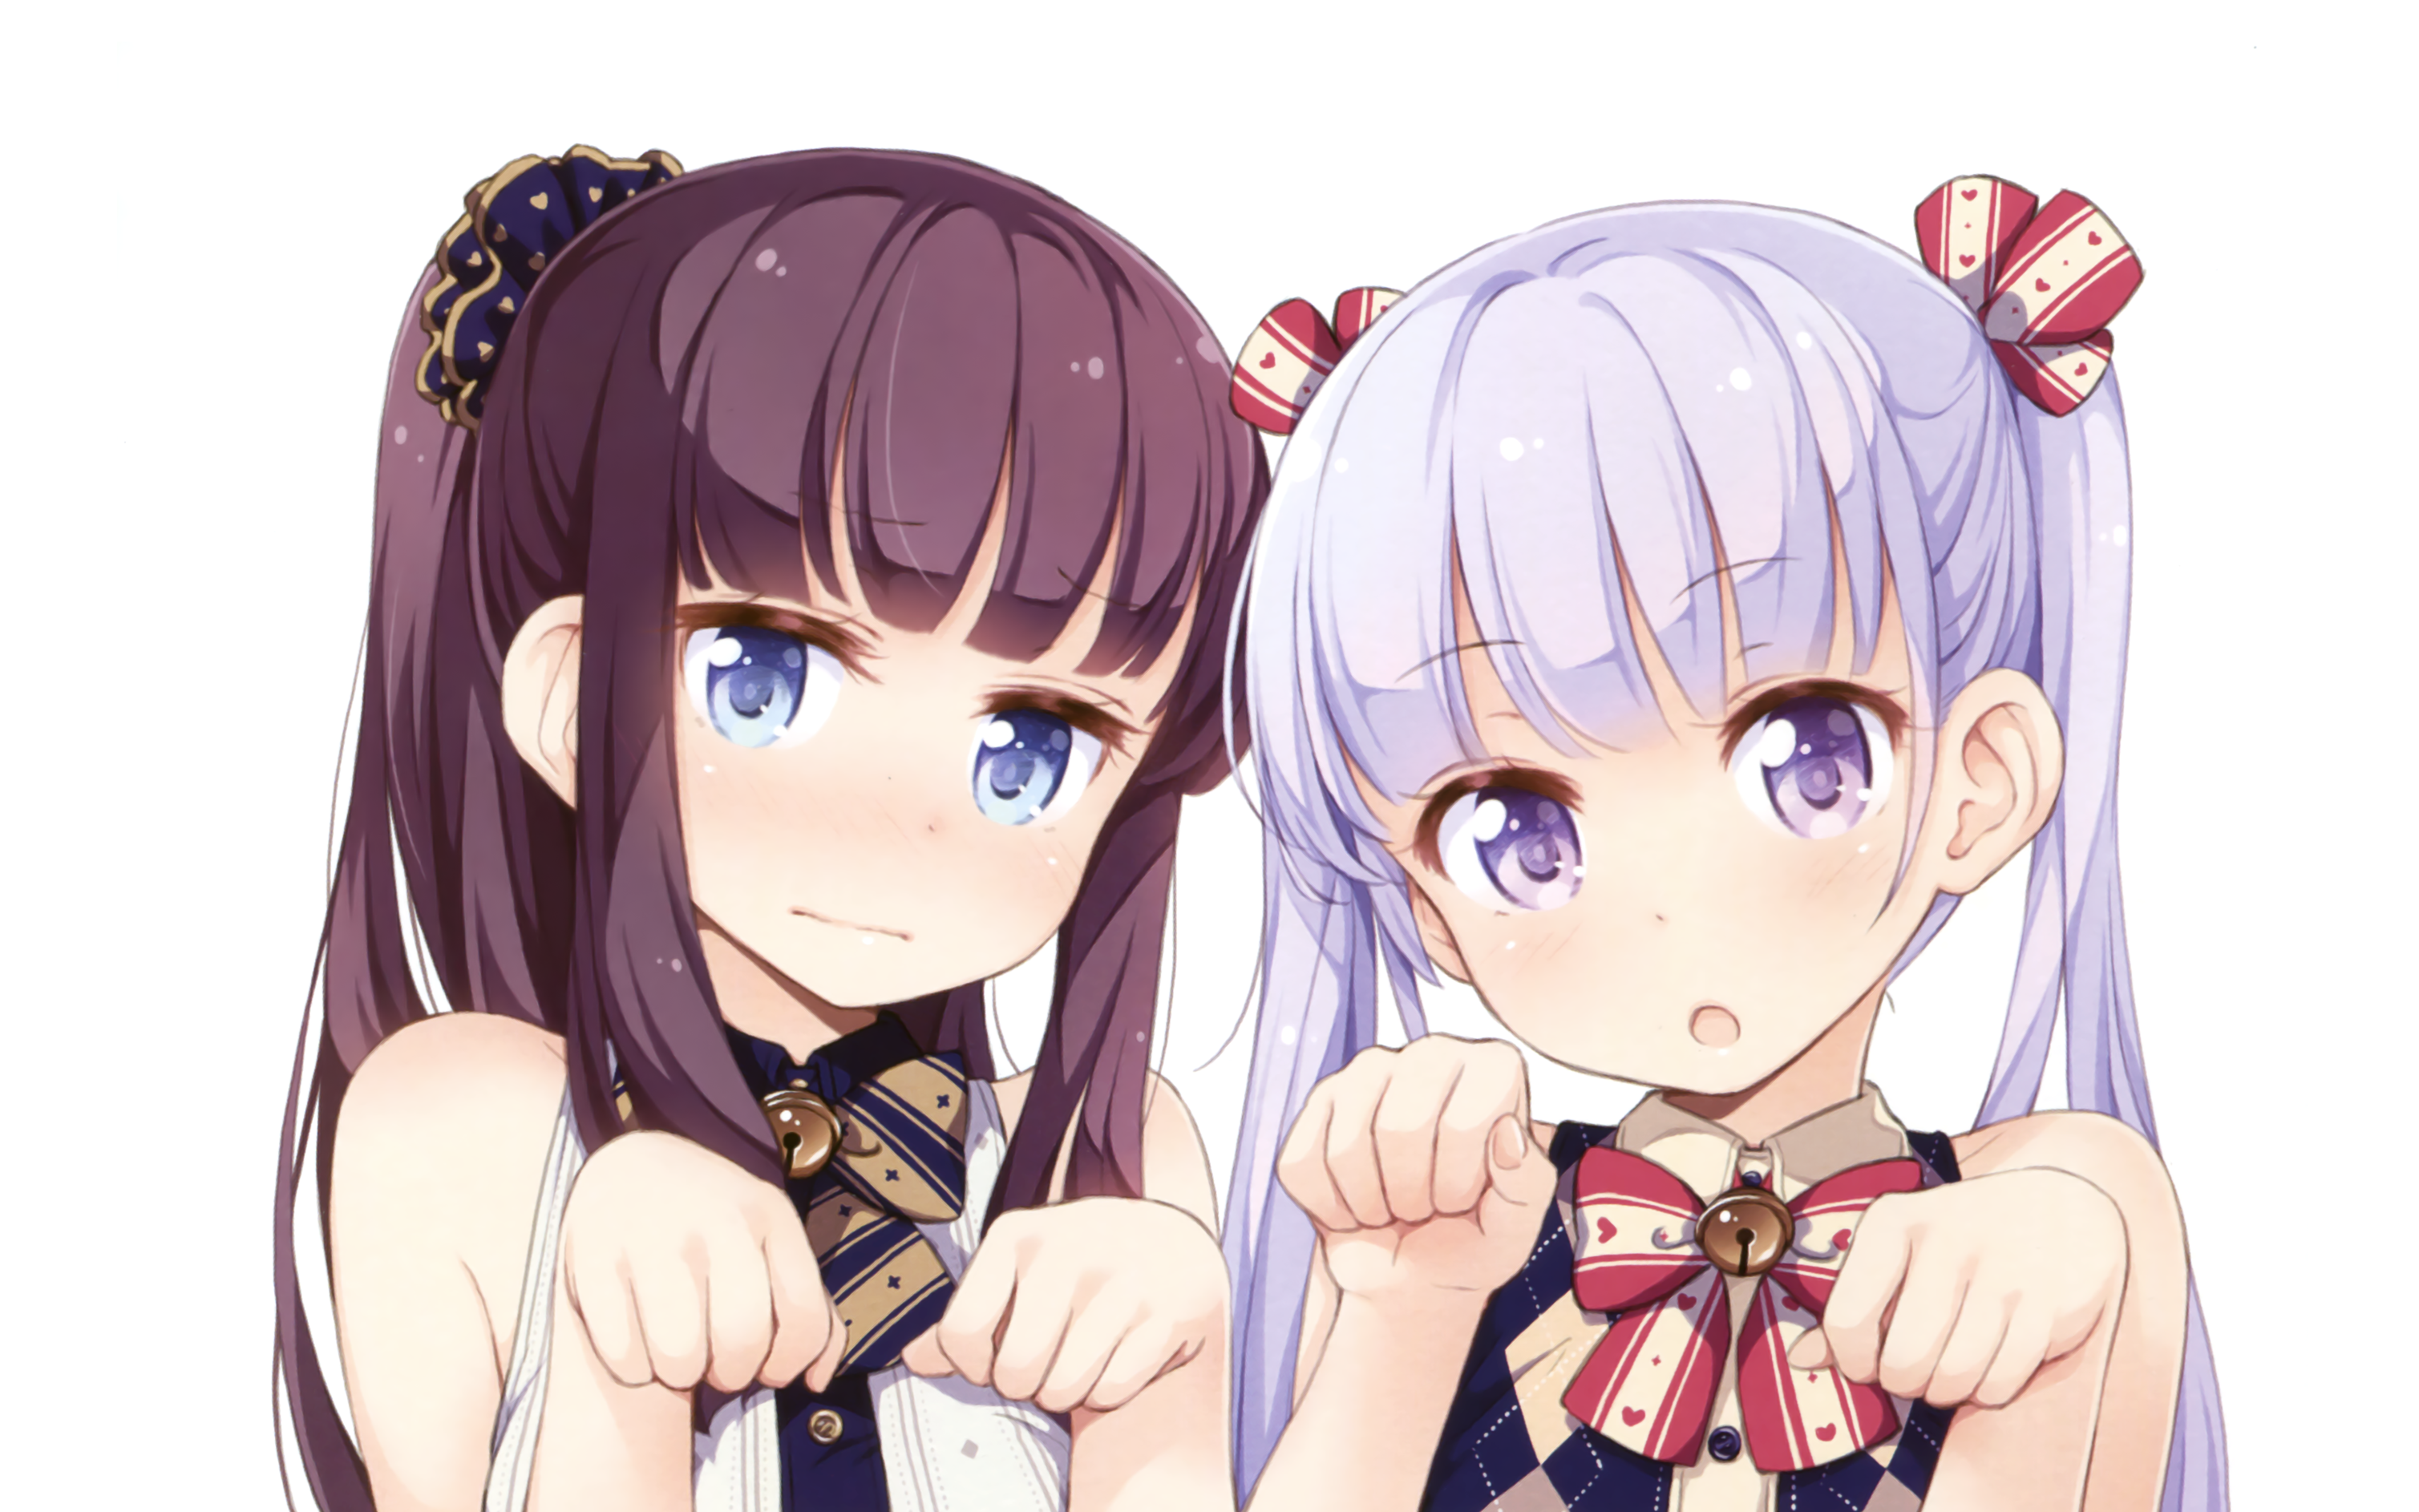 Anime New Game! HD Wallpaper | Background Image